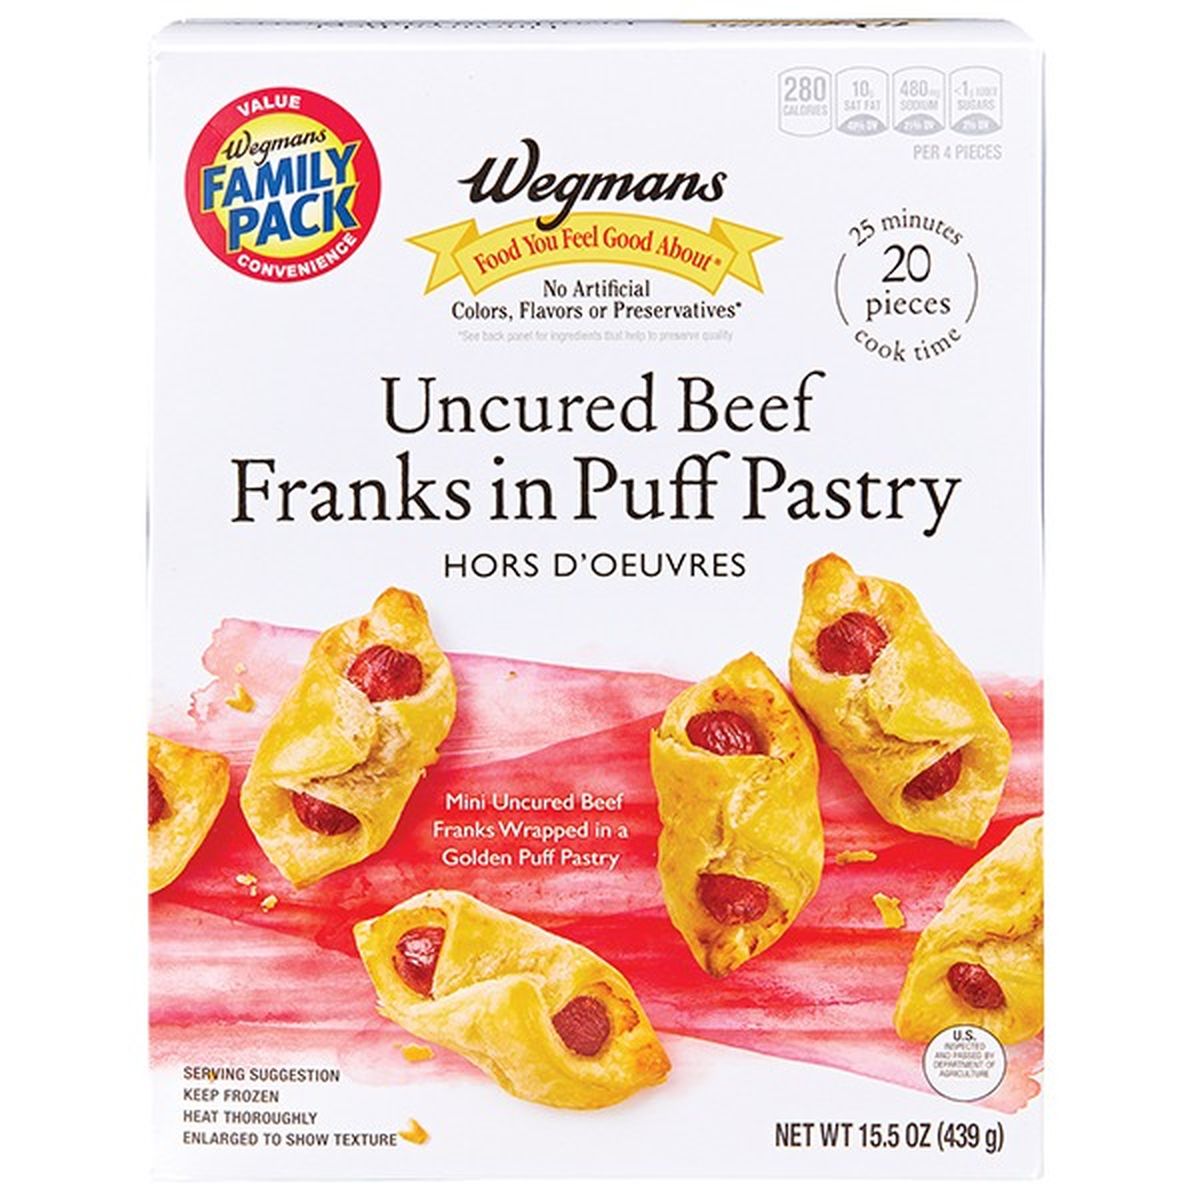 Calories in Wegmans Hors D Oeuvres Uncured Beef Franks in Puffed Pastry, FAMILY PACK